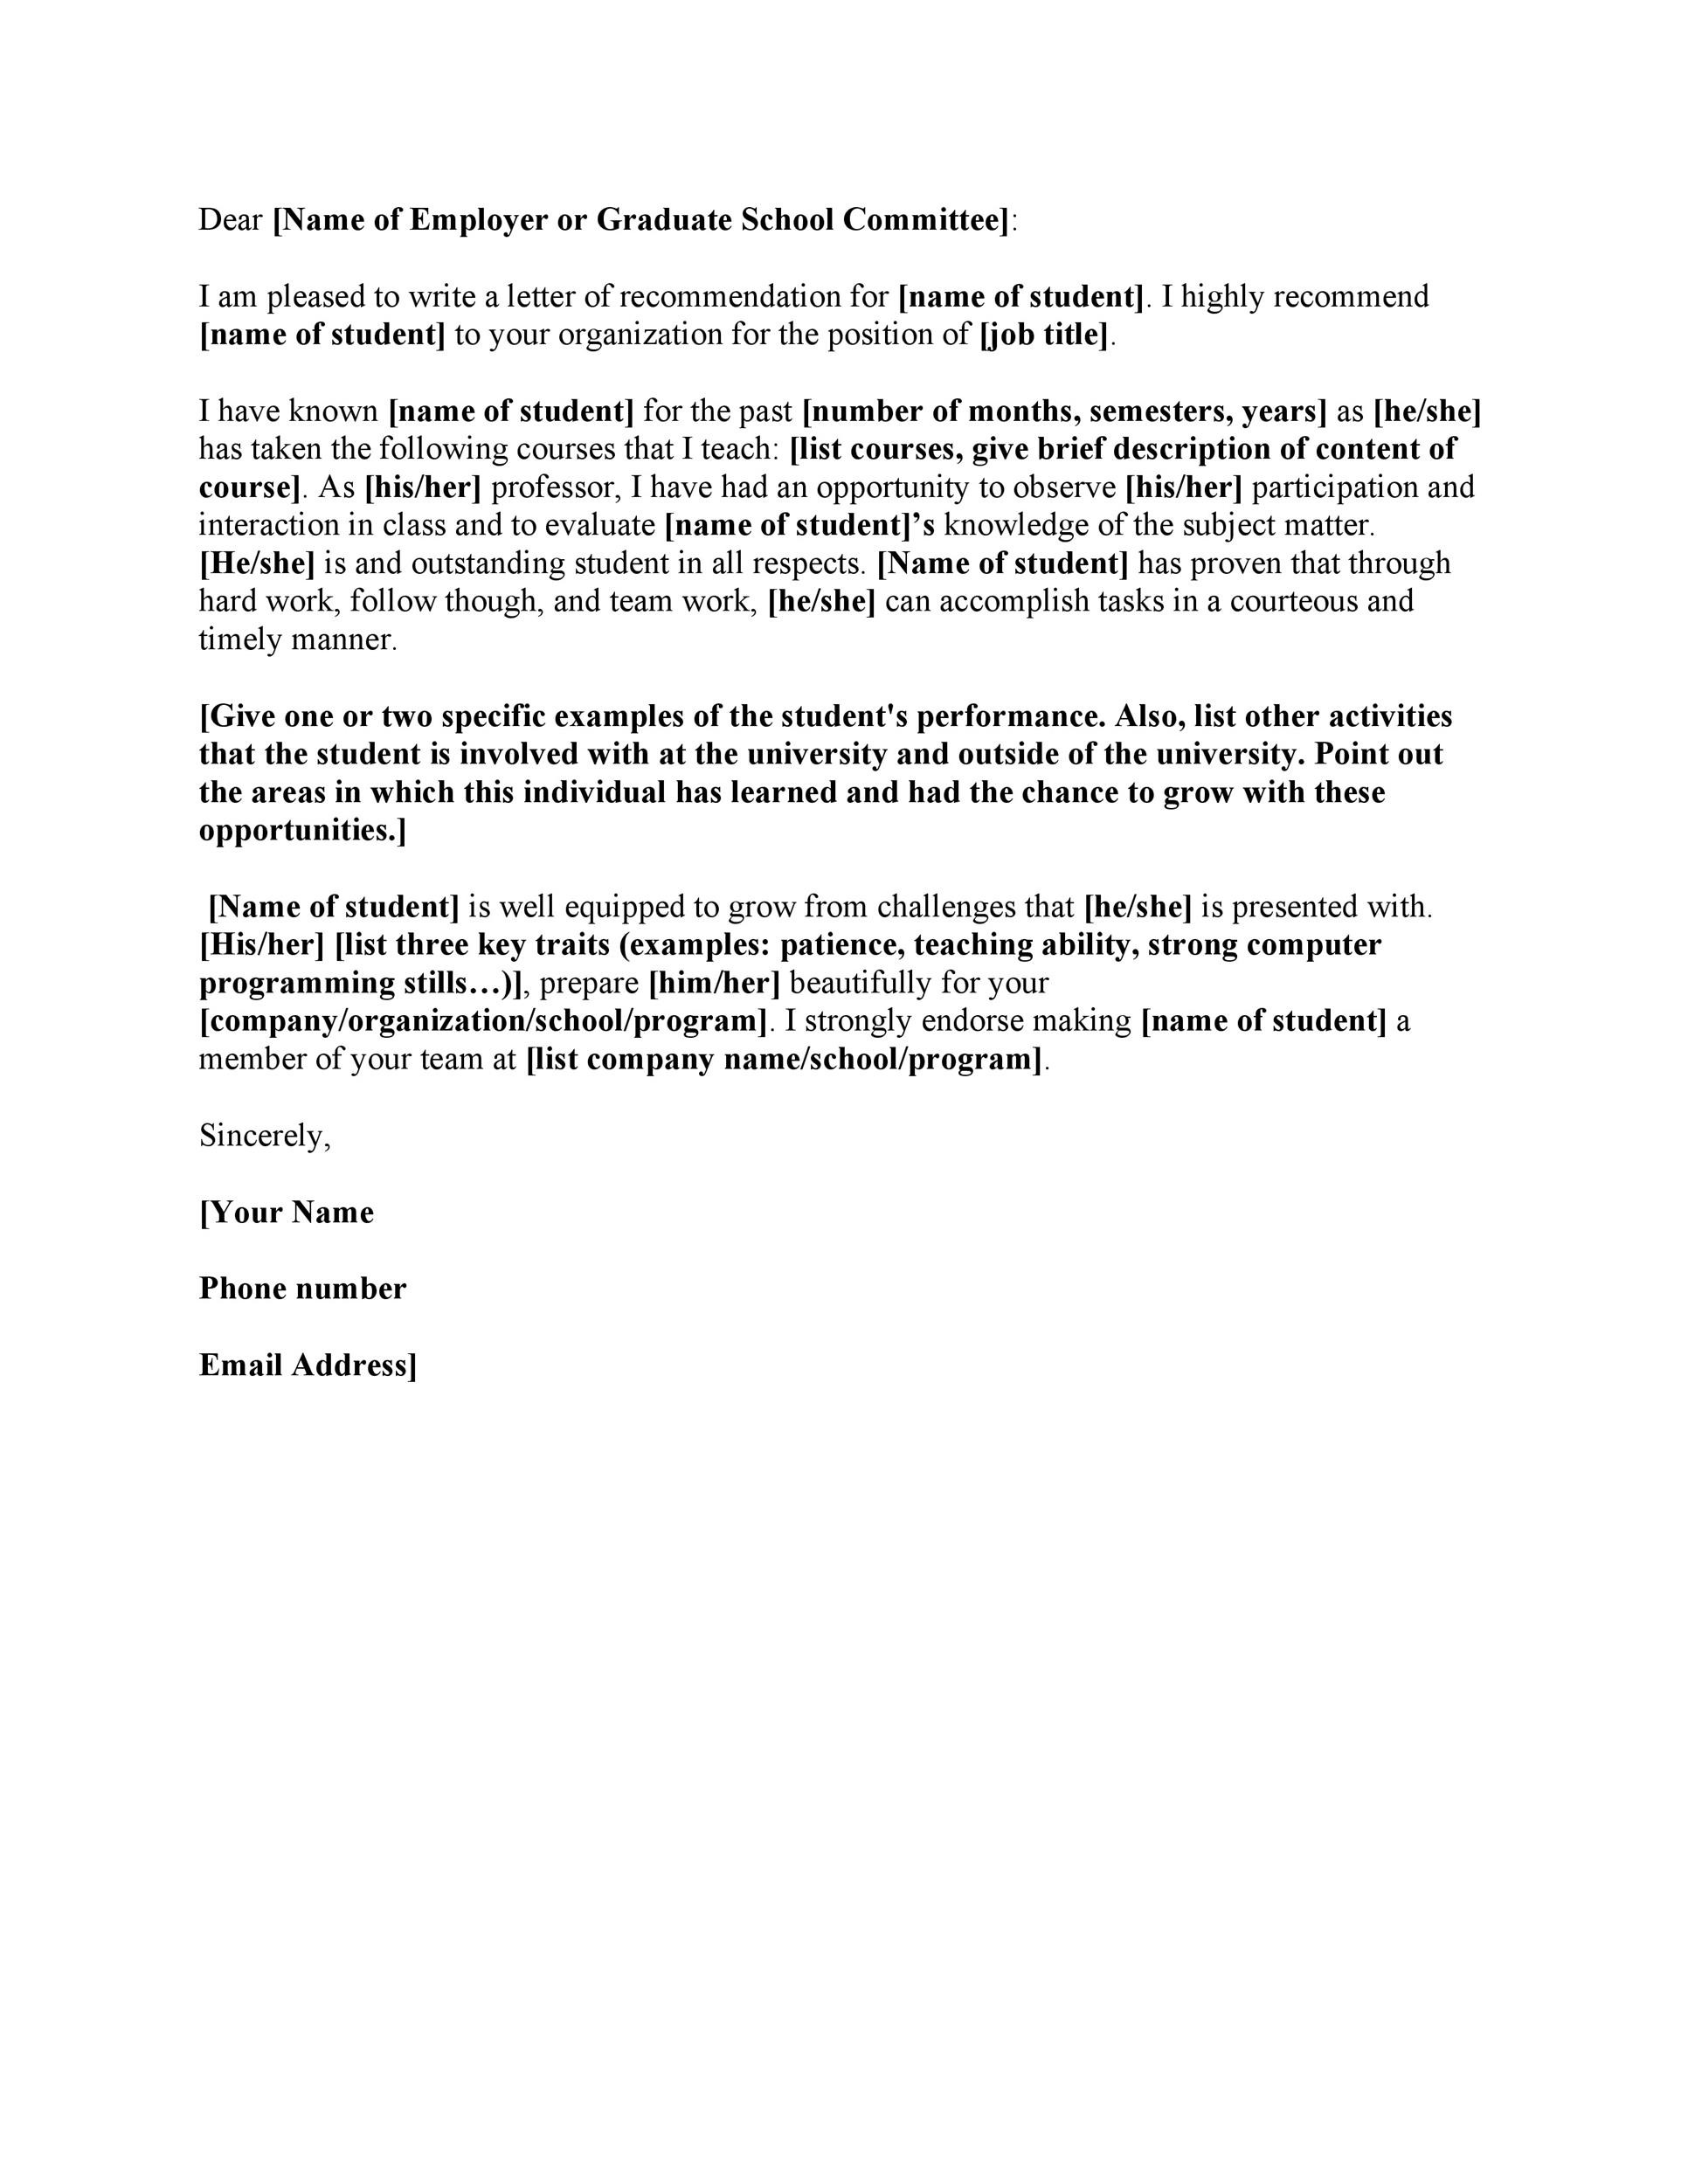 Sample Recommendation Letter For Coworker Teacher from templatelab.com